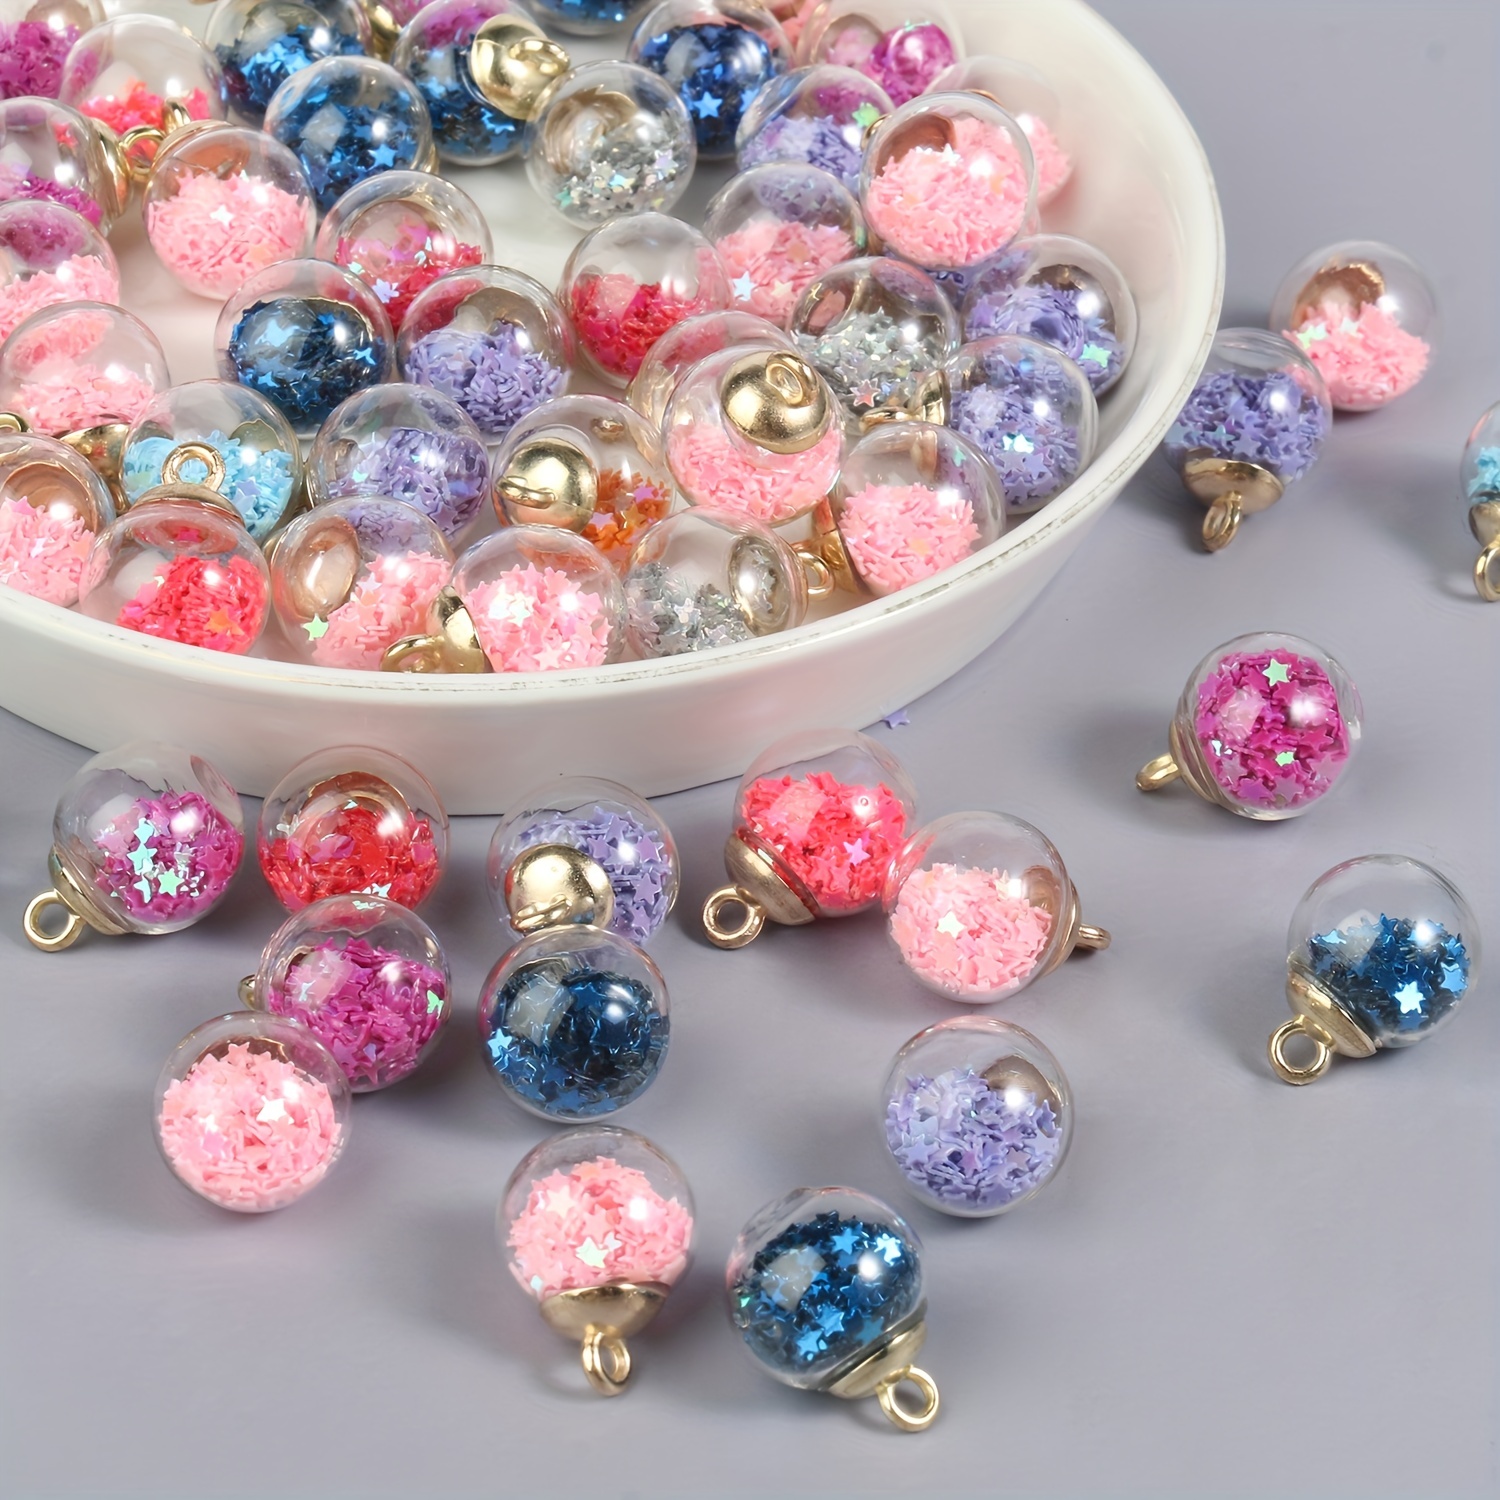  SEWACC 30pcs Pendant Accessories Handmade Jewelry Mini Glass  Charm Glass Sequins Charm Holder for Necklace Pendant Clasp for Necklace  Glass Ball Embellishment Sequin Ball Crystal : Arts, Crafts & Sewing